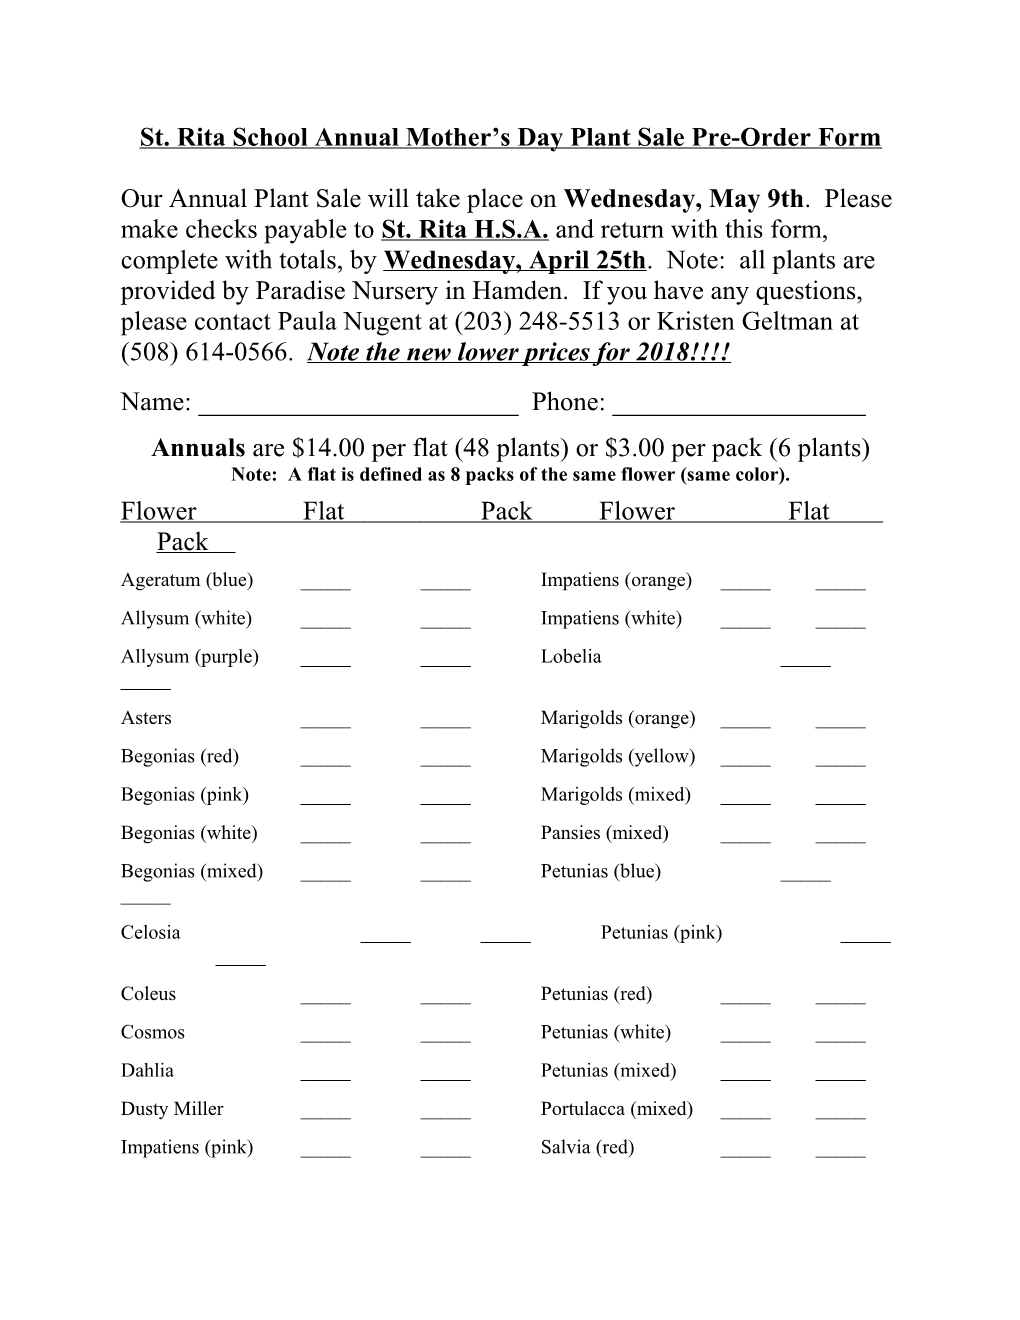 St. Rita School Annual Mother S Day Plant Salepre-Order Form